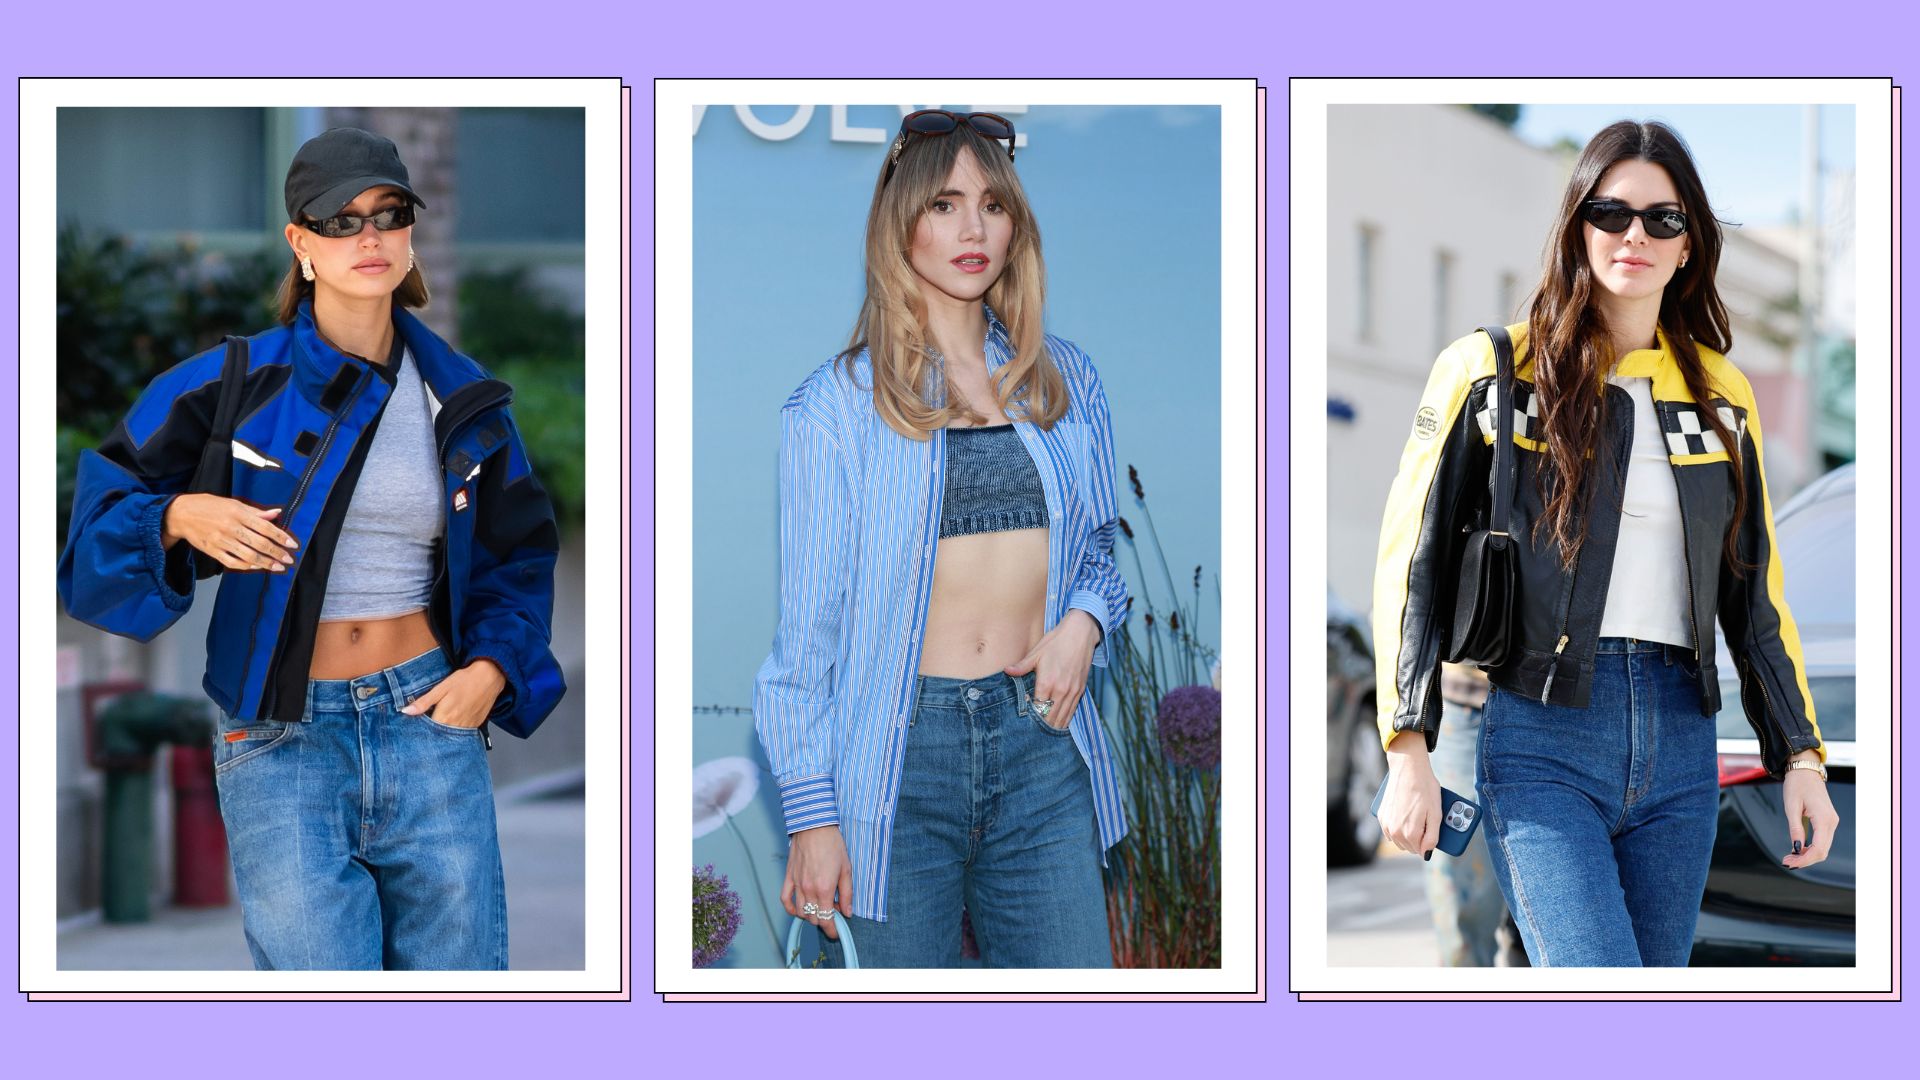 Kendall Jenner, Hailey Bieber and More Show You How To Style Flared Jeans  for the Summer